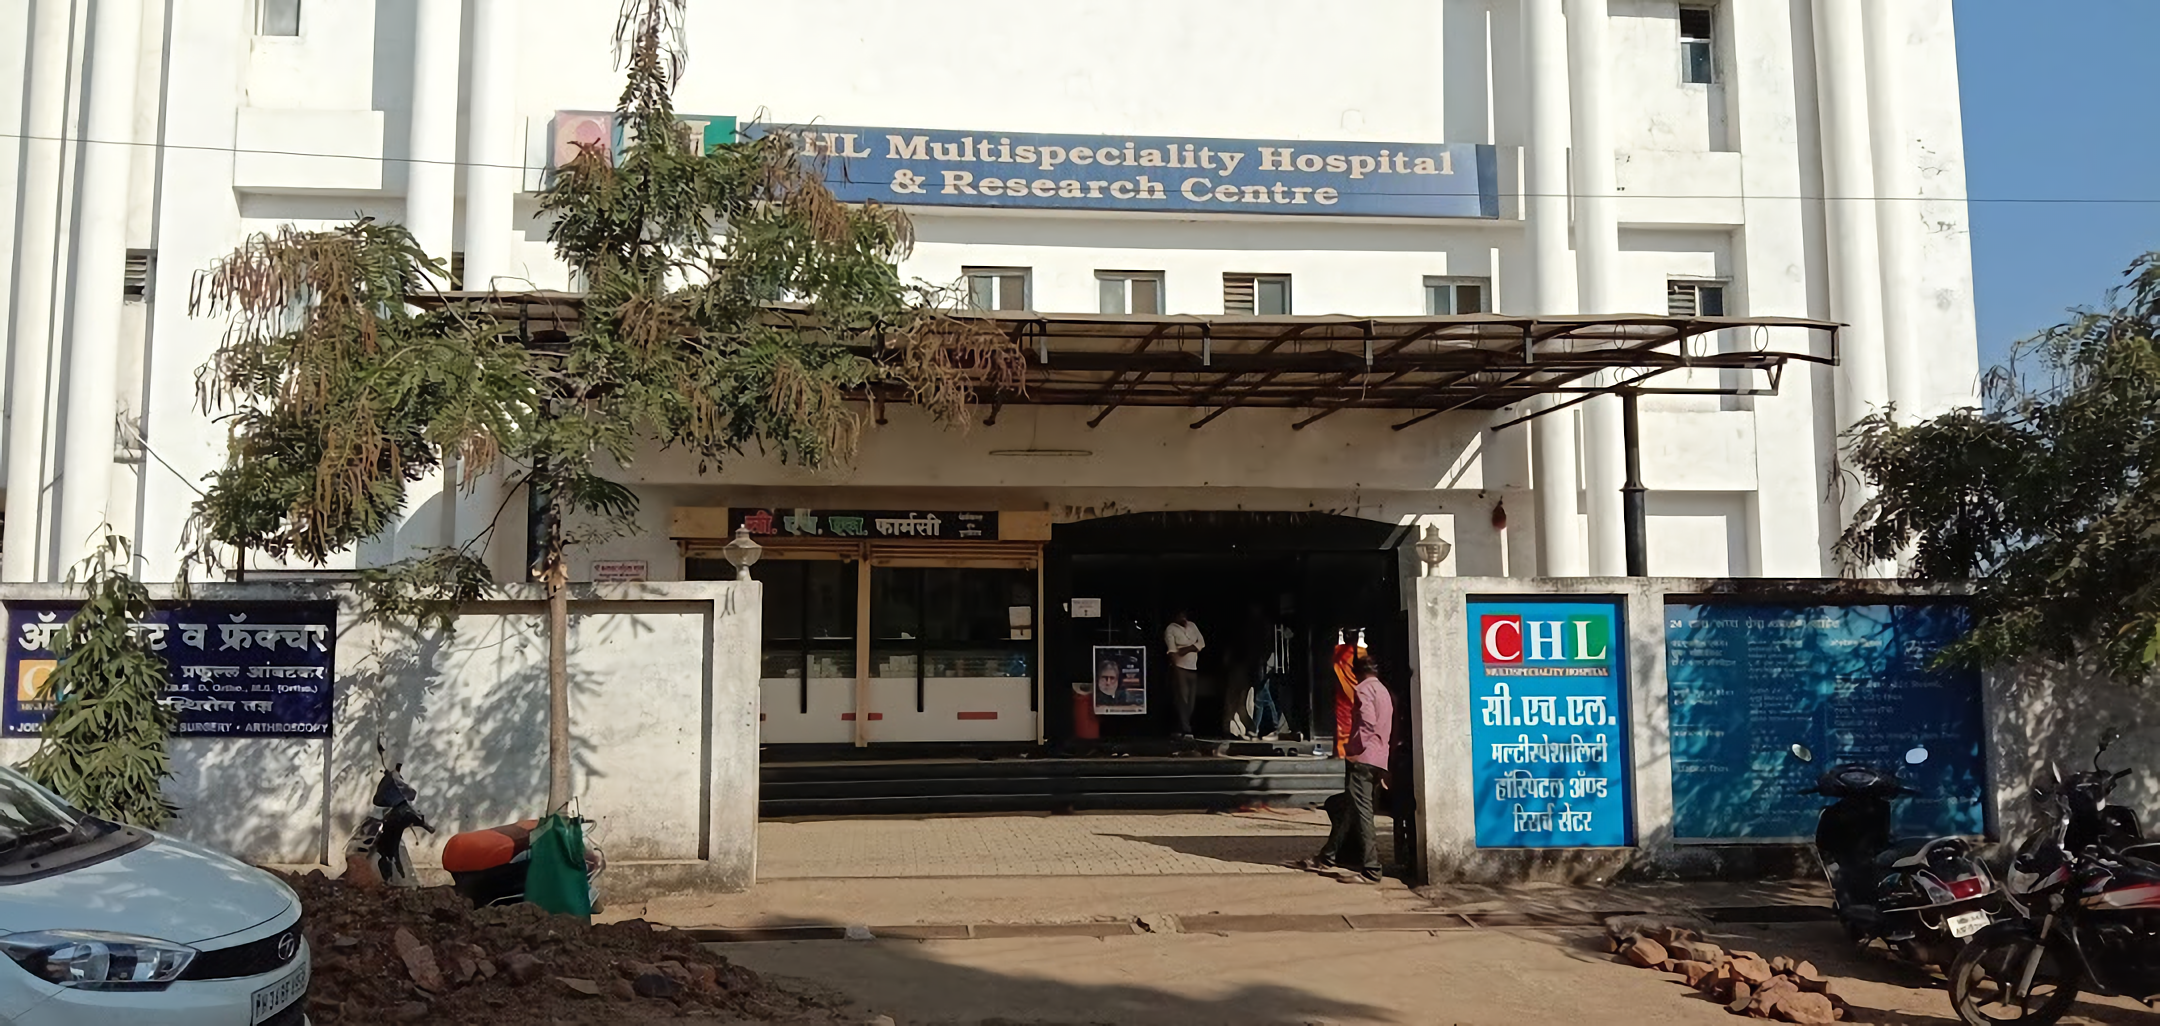 CHL Multispeciality Hospital And Research Centre Chandrapur Tukum